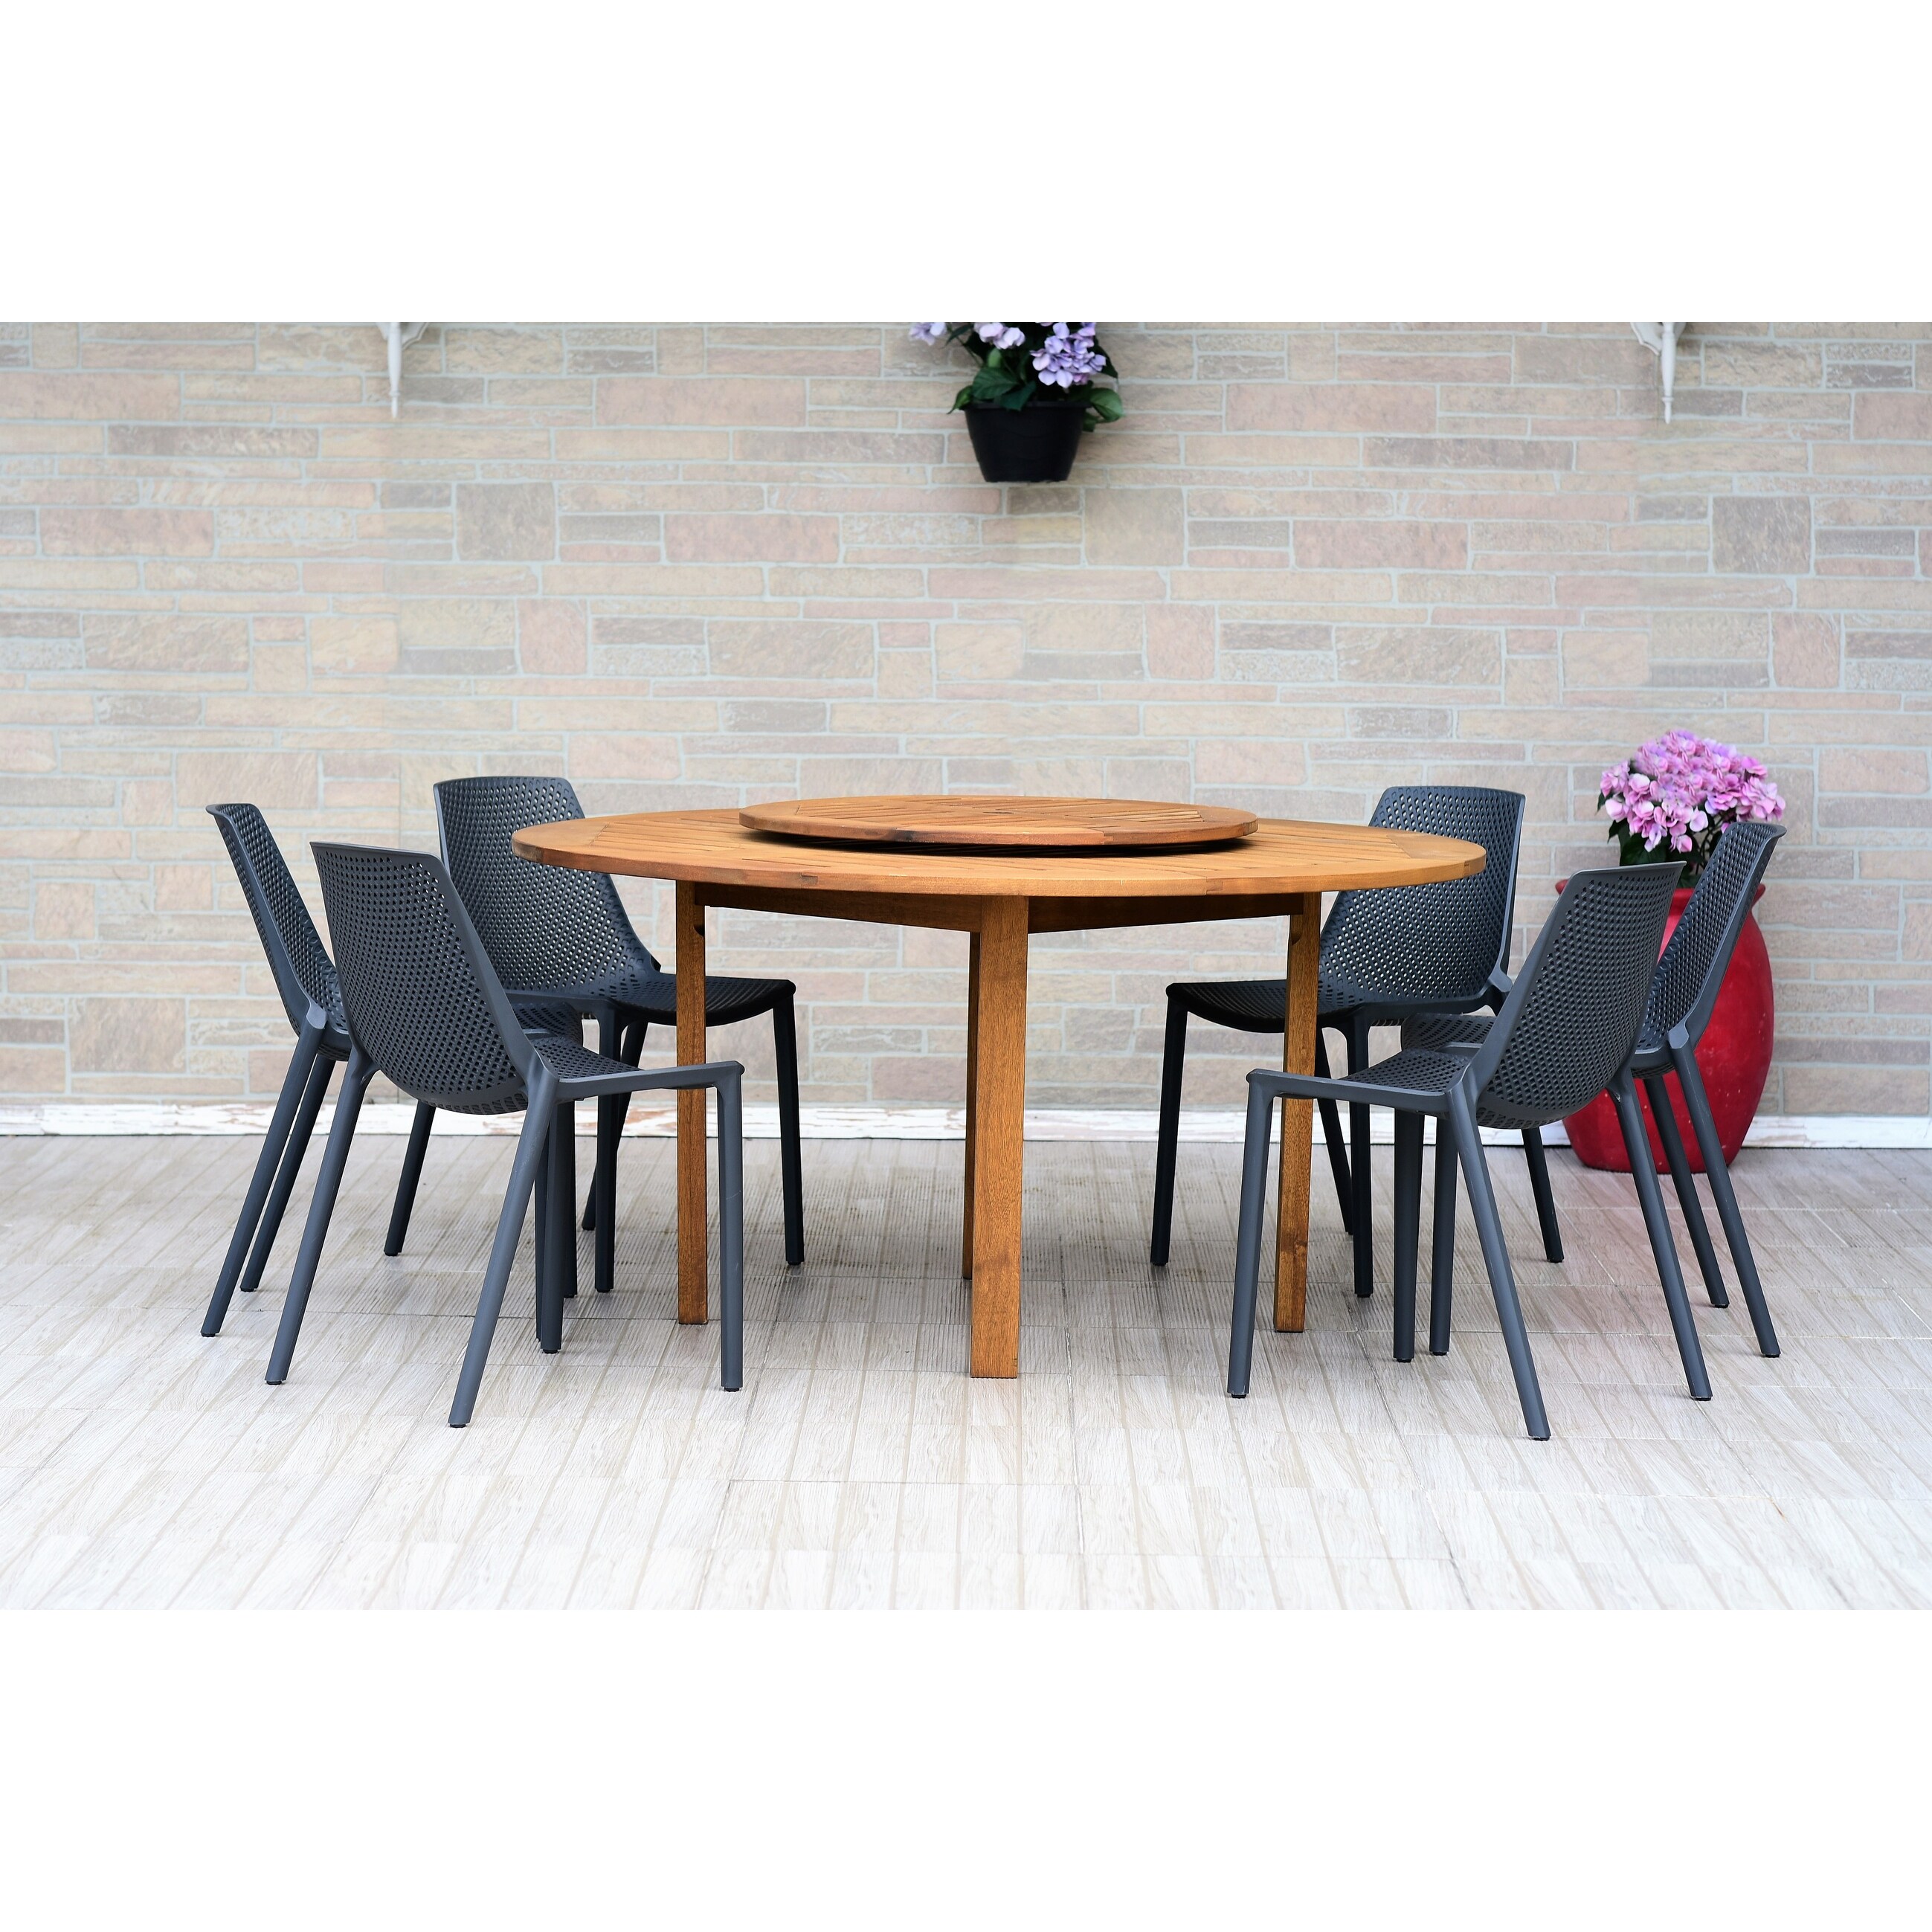 7-piece Wood Lazy Susan Dining Set With Plastic Chairs